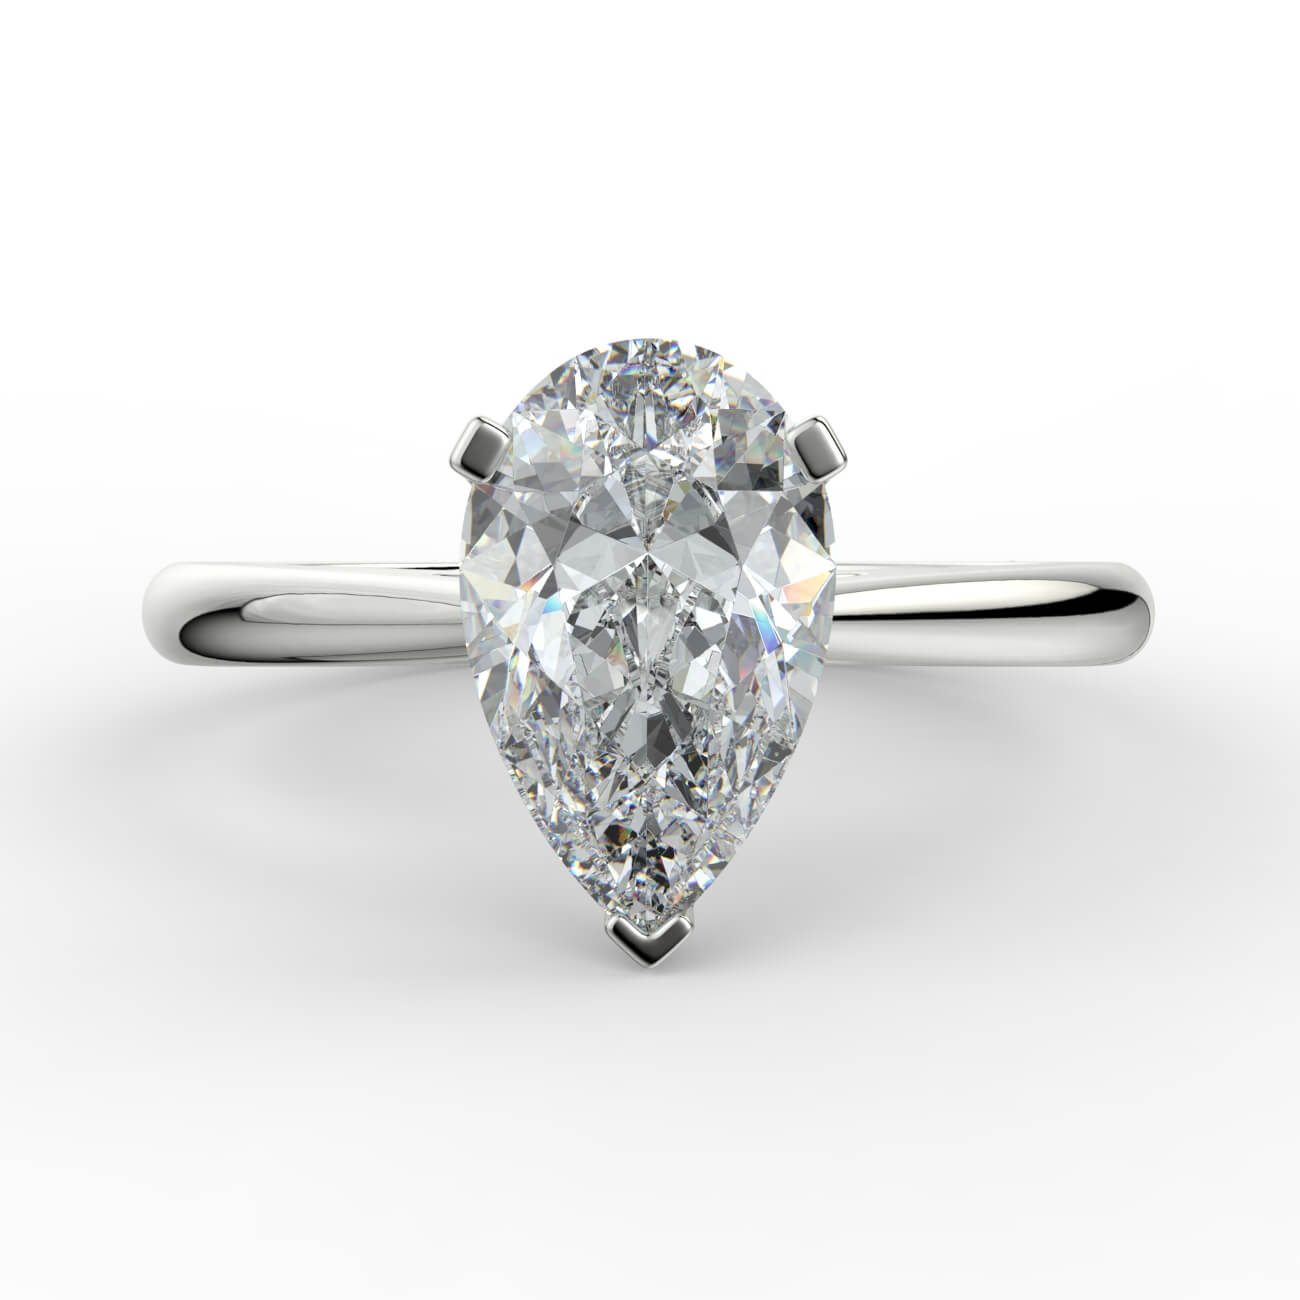 Pear cut diamond cathedral engagement ring in white gold – Australian Diamond Network